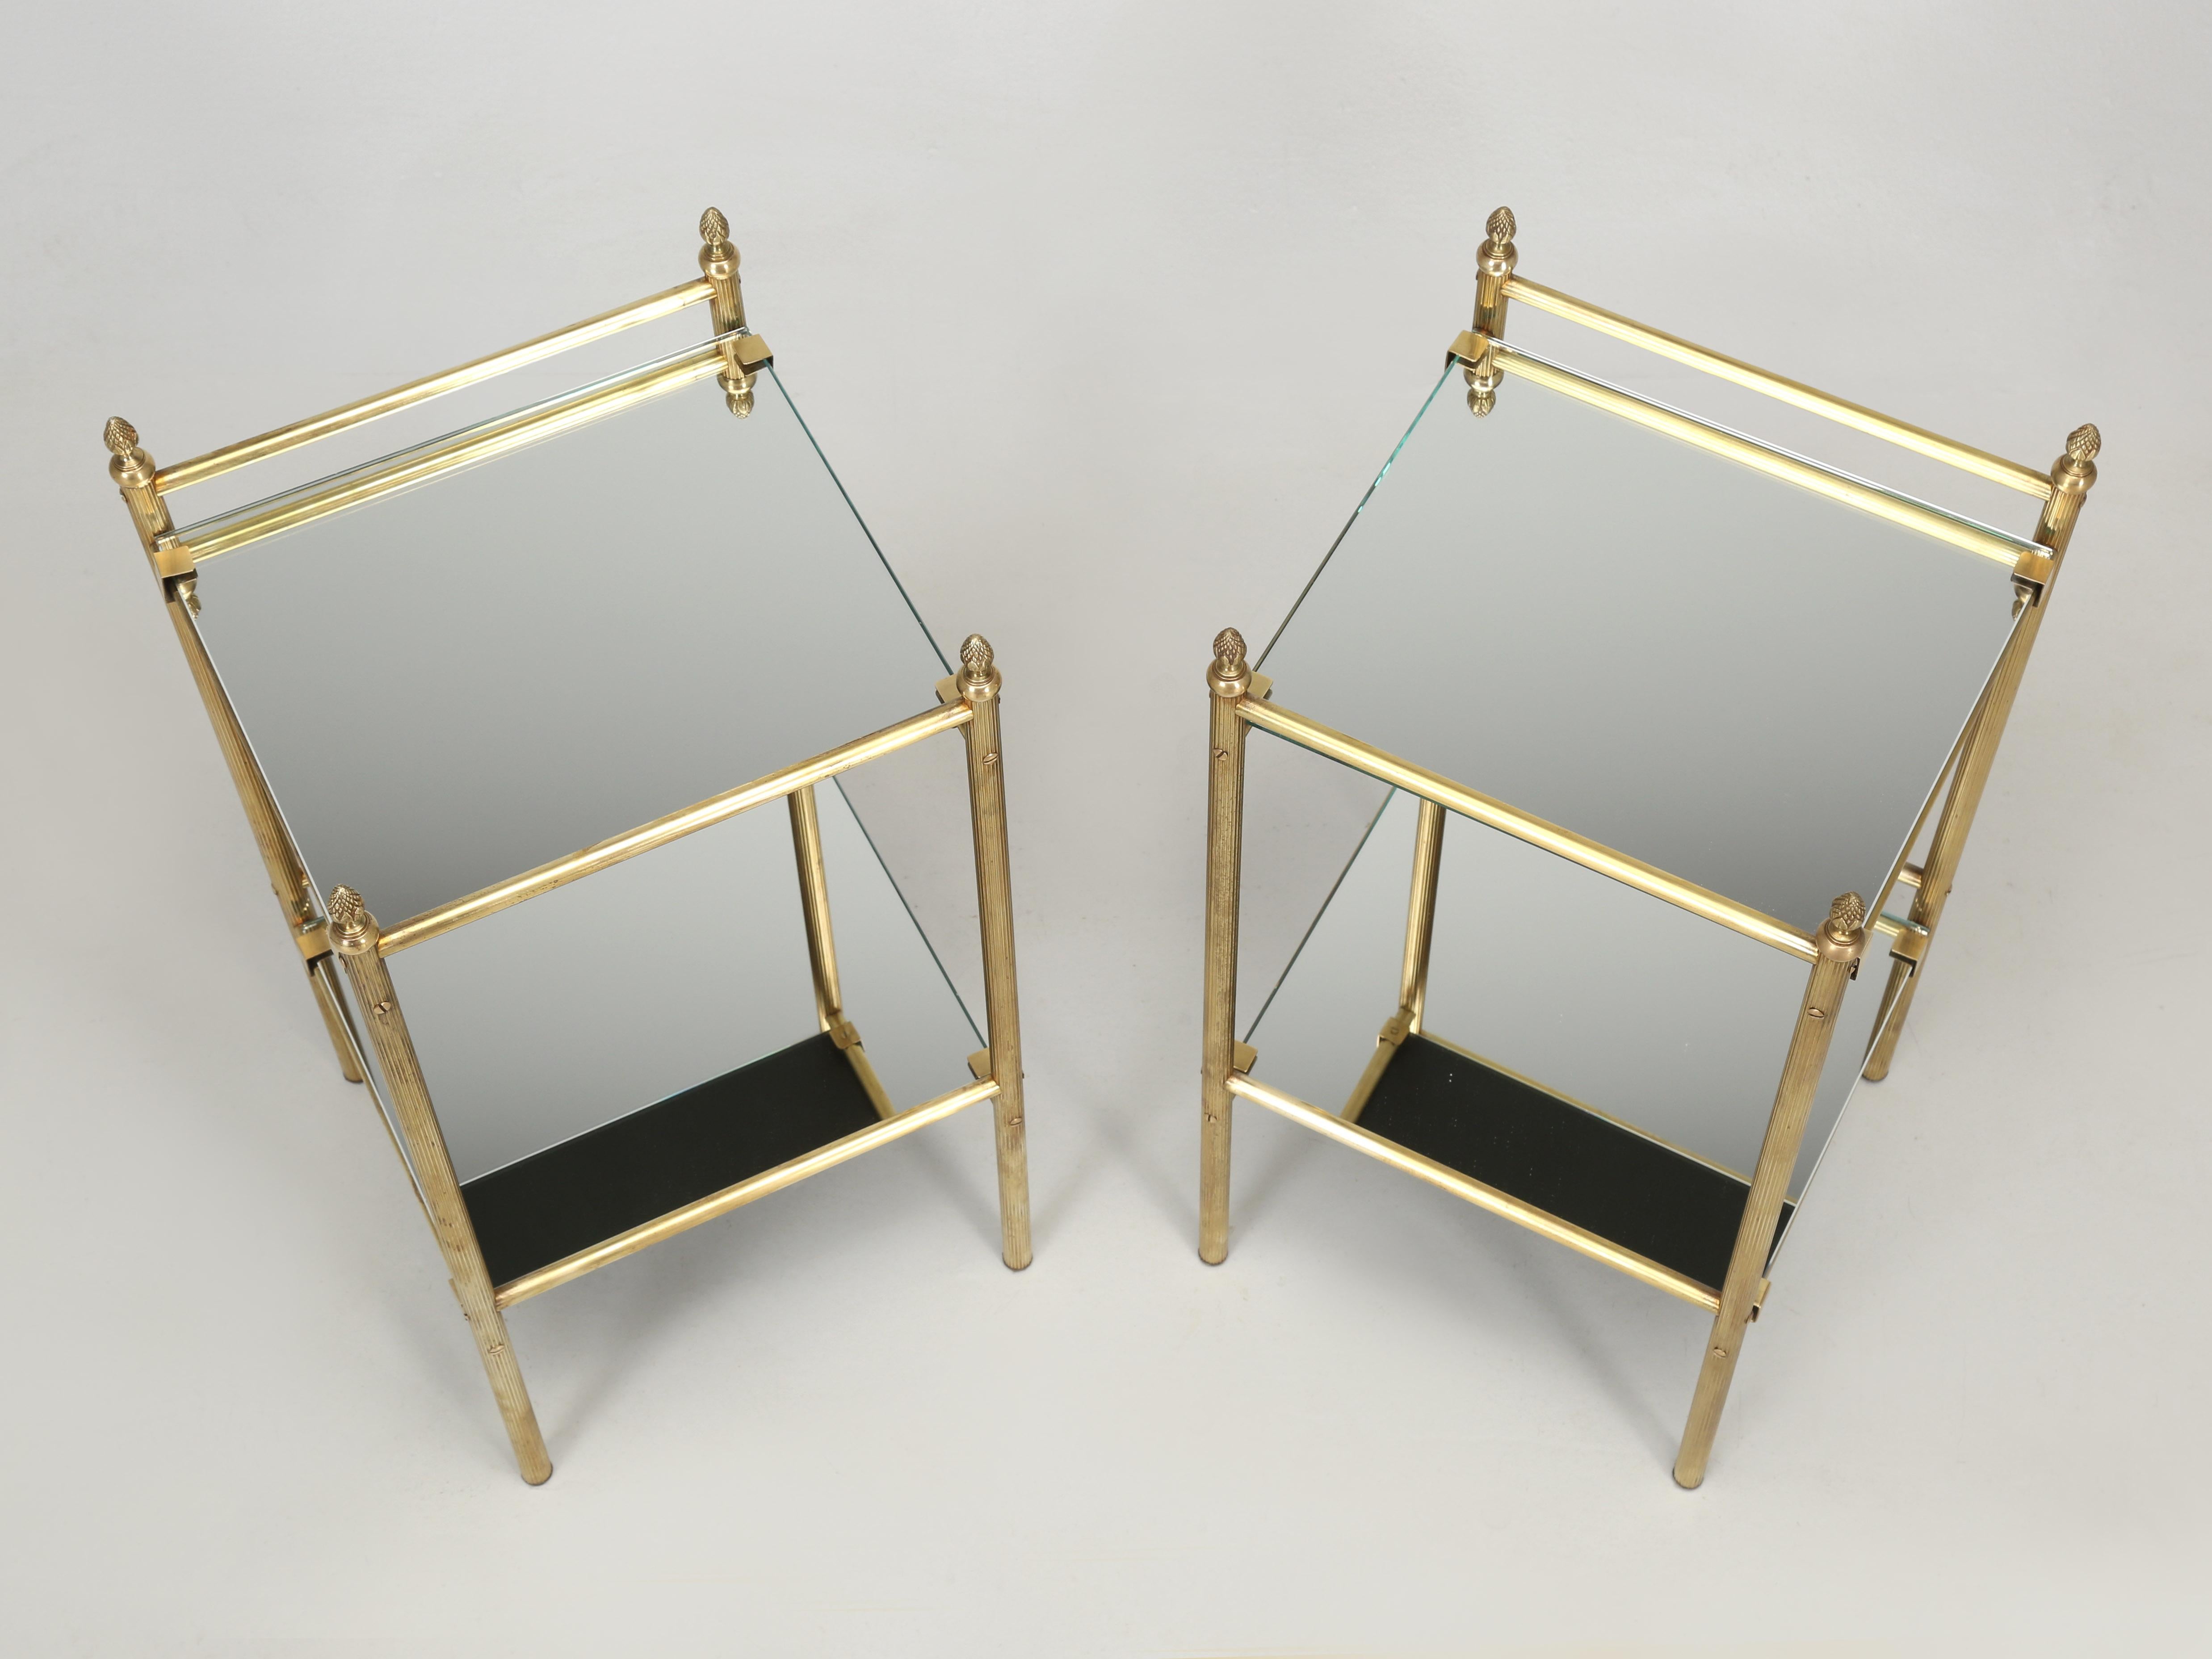 French Mid-Century Modern Pair of Brass End Tables or Side Tables with Mirrored Top Surfaces. We would venture a guess and say these were probably made in the 1960’s and are most certainly from France. The Mirror Tops for the Brass End Tables are